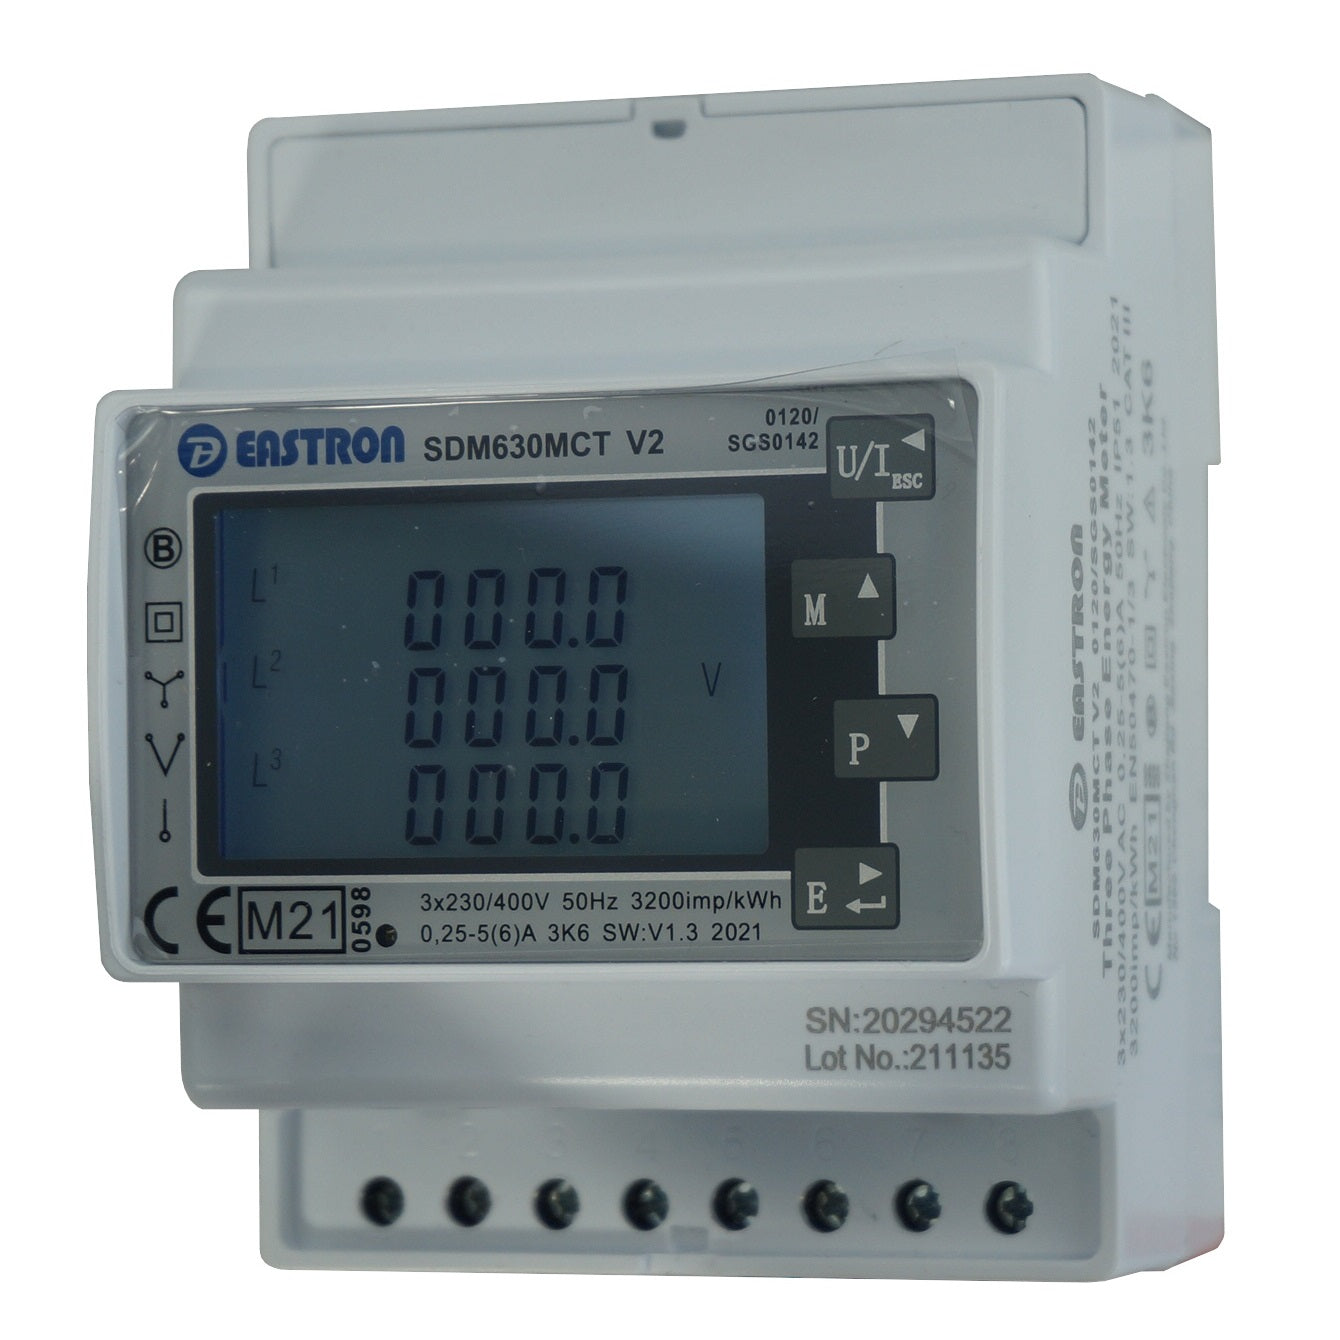 SDM630MCT-MODBUS-MID-CL0.5 V2, DIN Rail Mount kWh Meter, 3 Phase, 240VAC aux, Class 0.5S, 1/5Amp Connect, w/ 2 x pulse outputs and RS485 Modbus RTU Comms, MID Approved